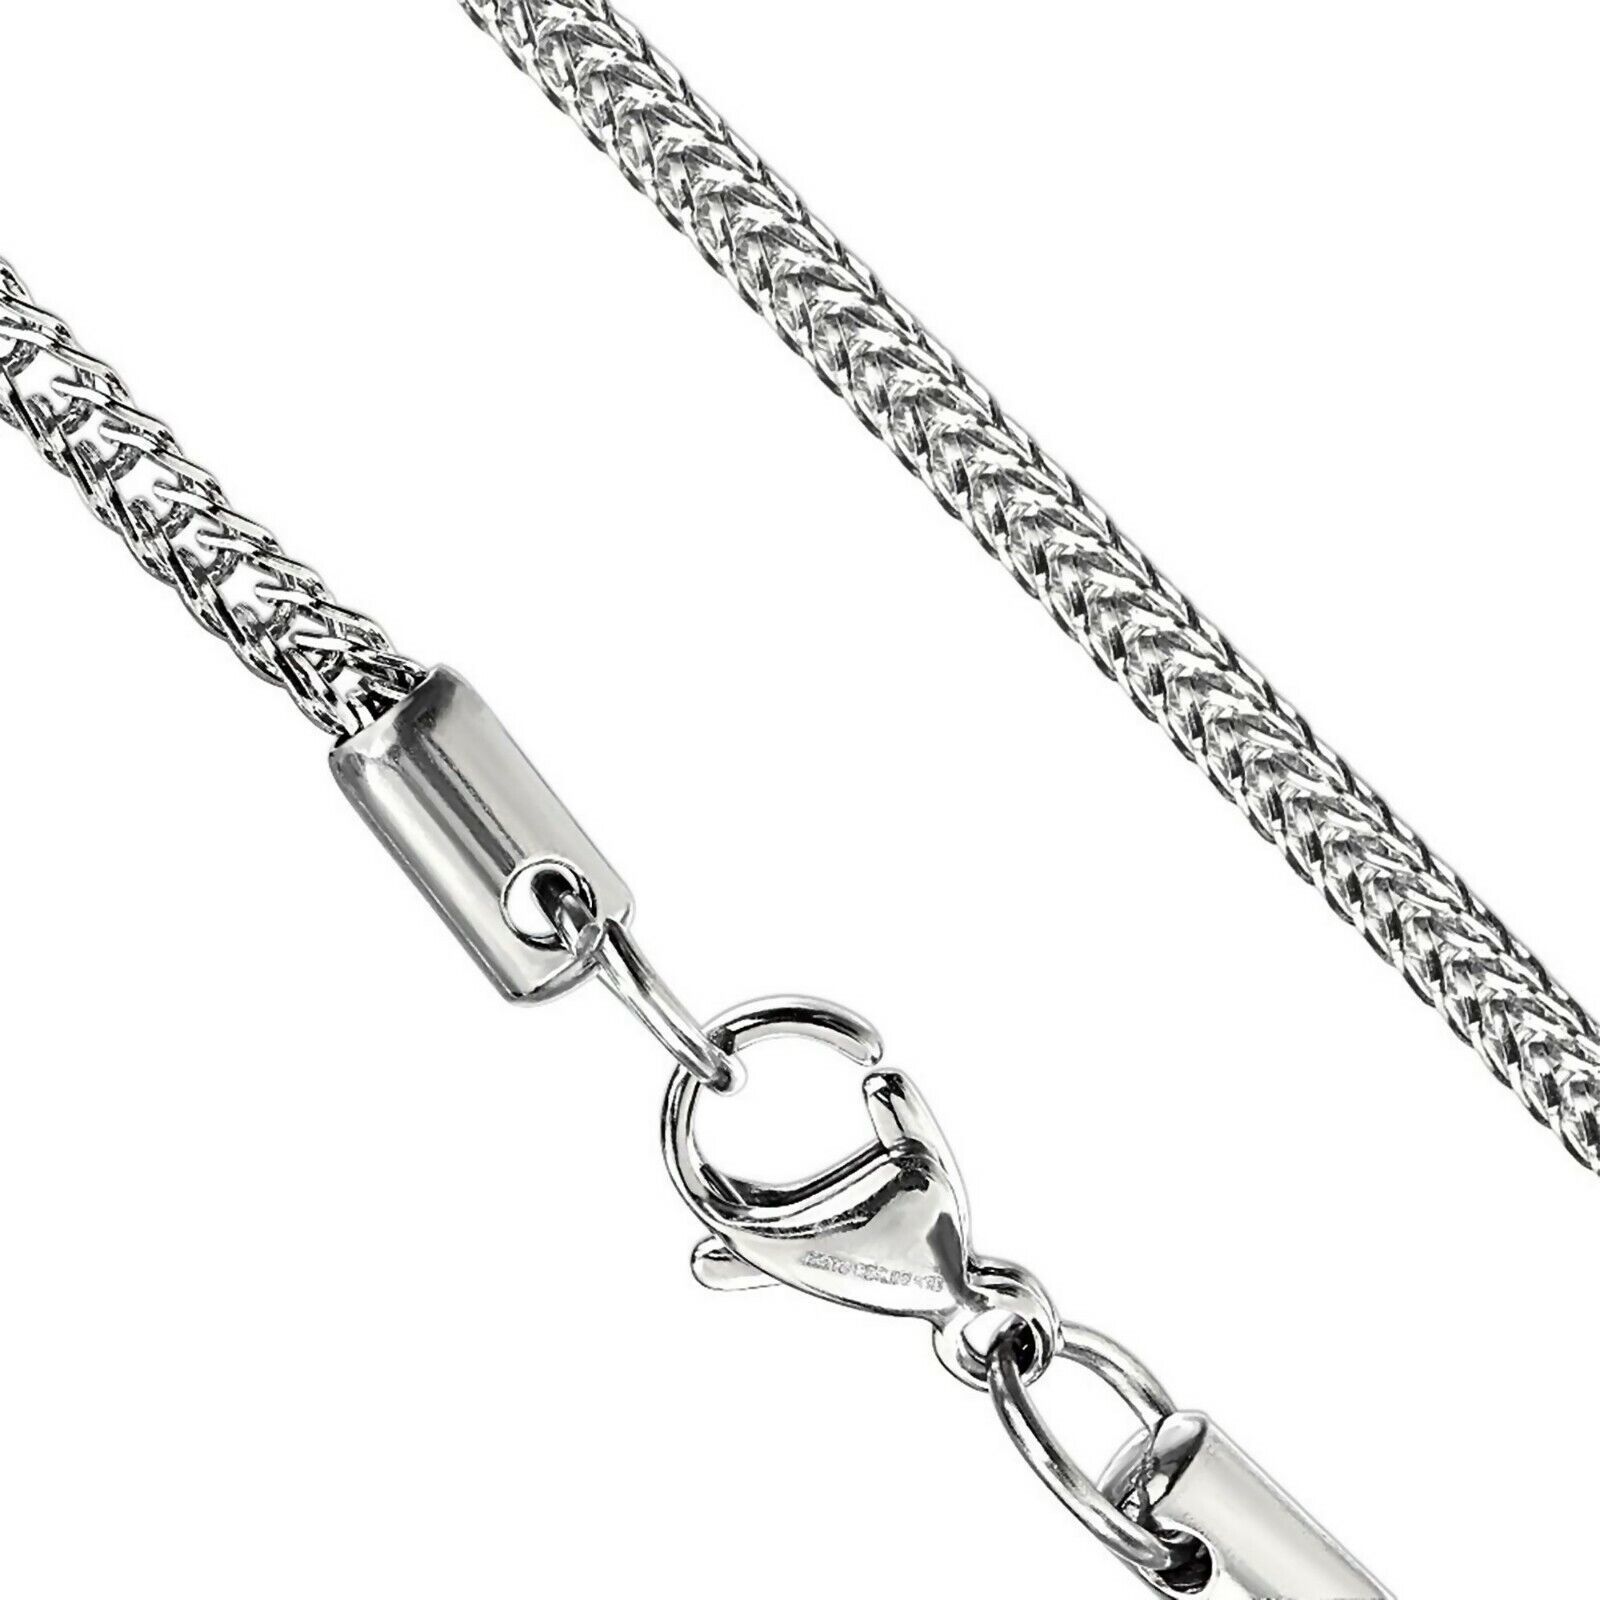 Franco Wheat Chain Silver Stainless Steel 3mm 20-inch Necklace for Men Women - $16.99